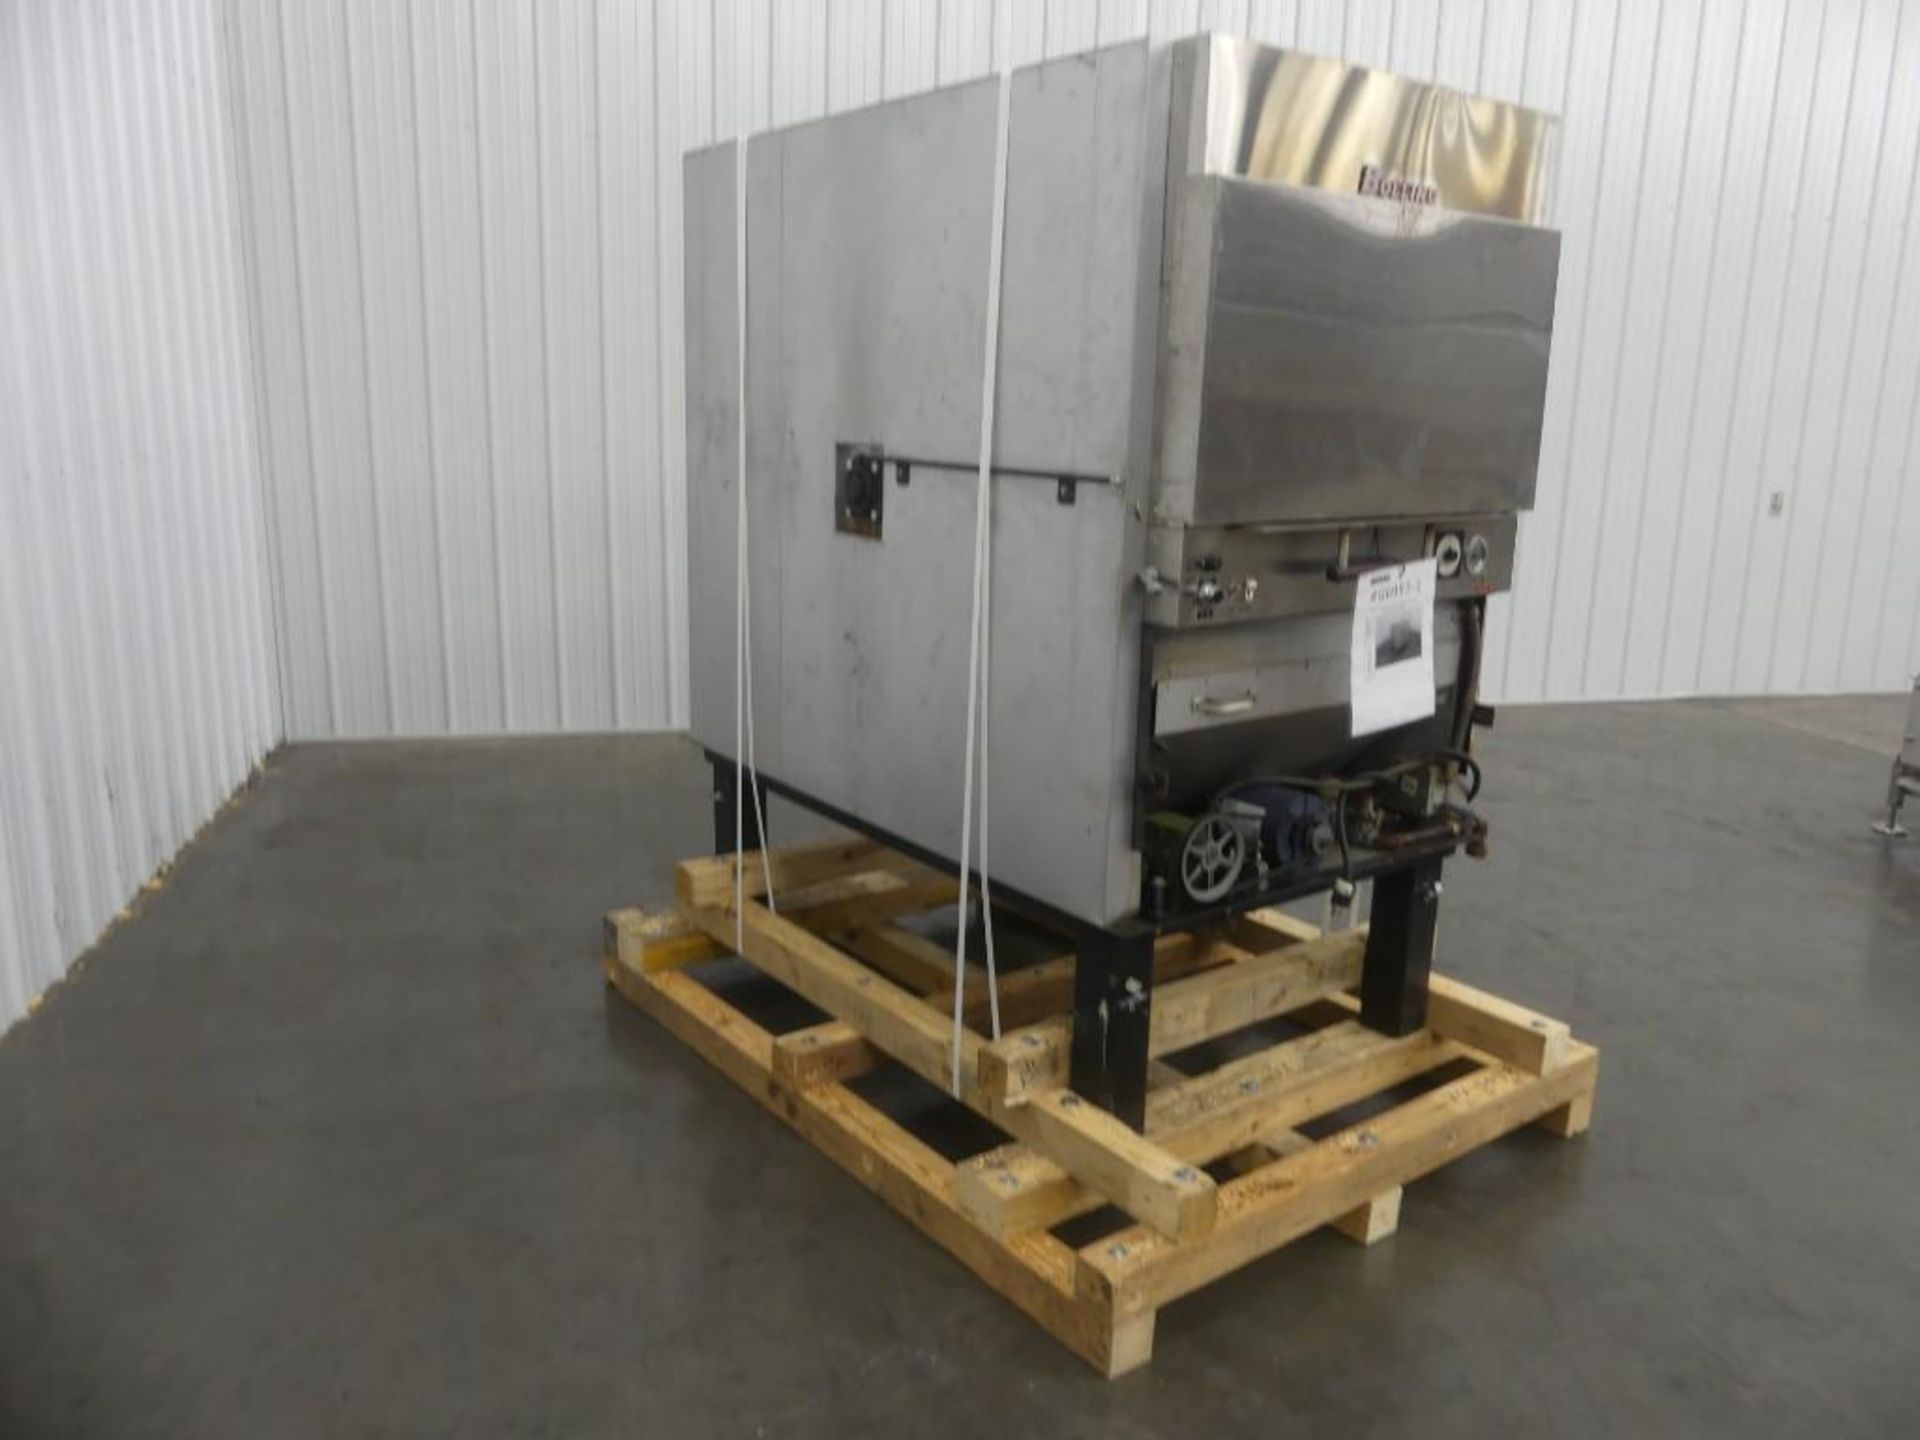 Bolling 500 M 5 Tray Revolving Rack SS Oven - Image 7 of 7